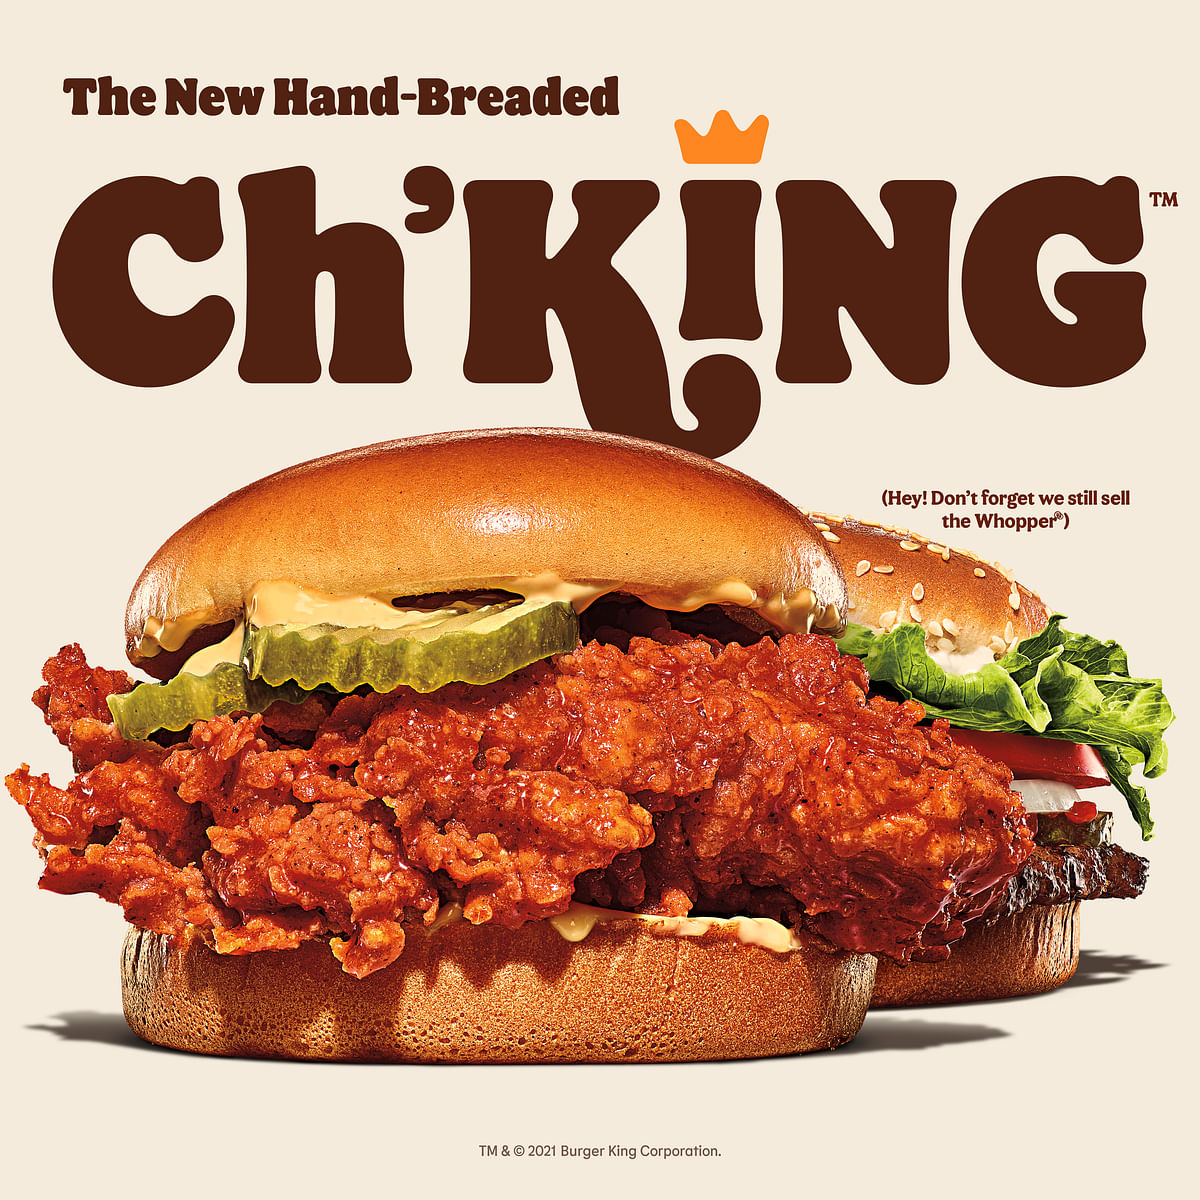 Does Burger King’s Ch’King pose a threat to the Whopper?